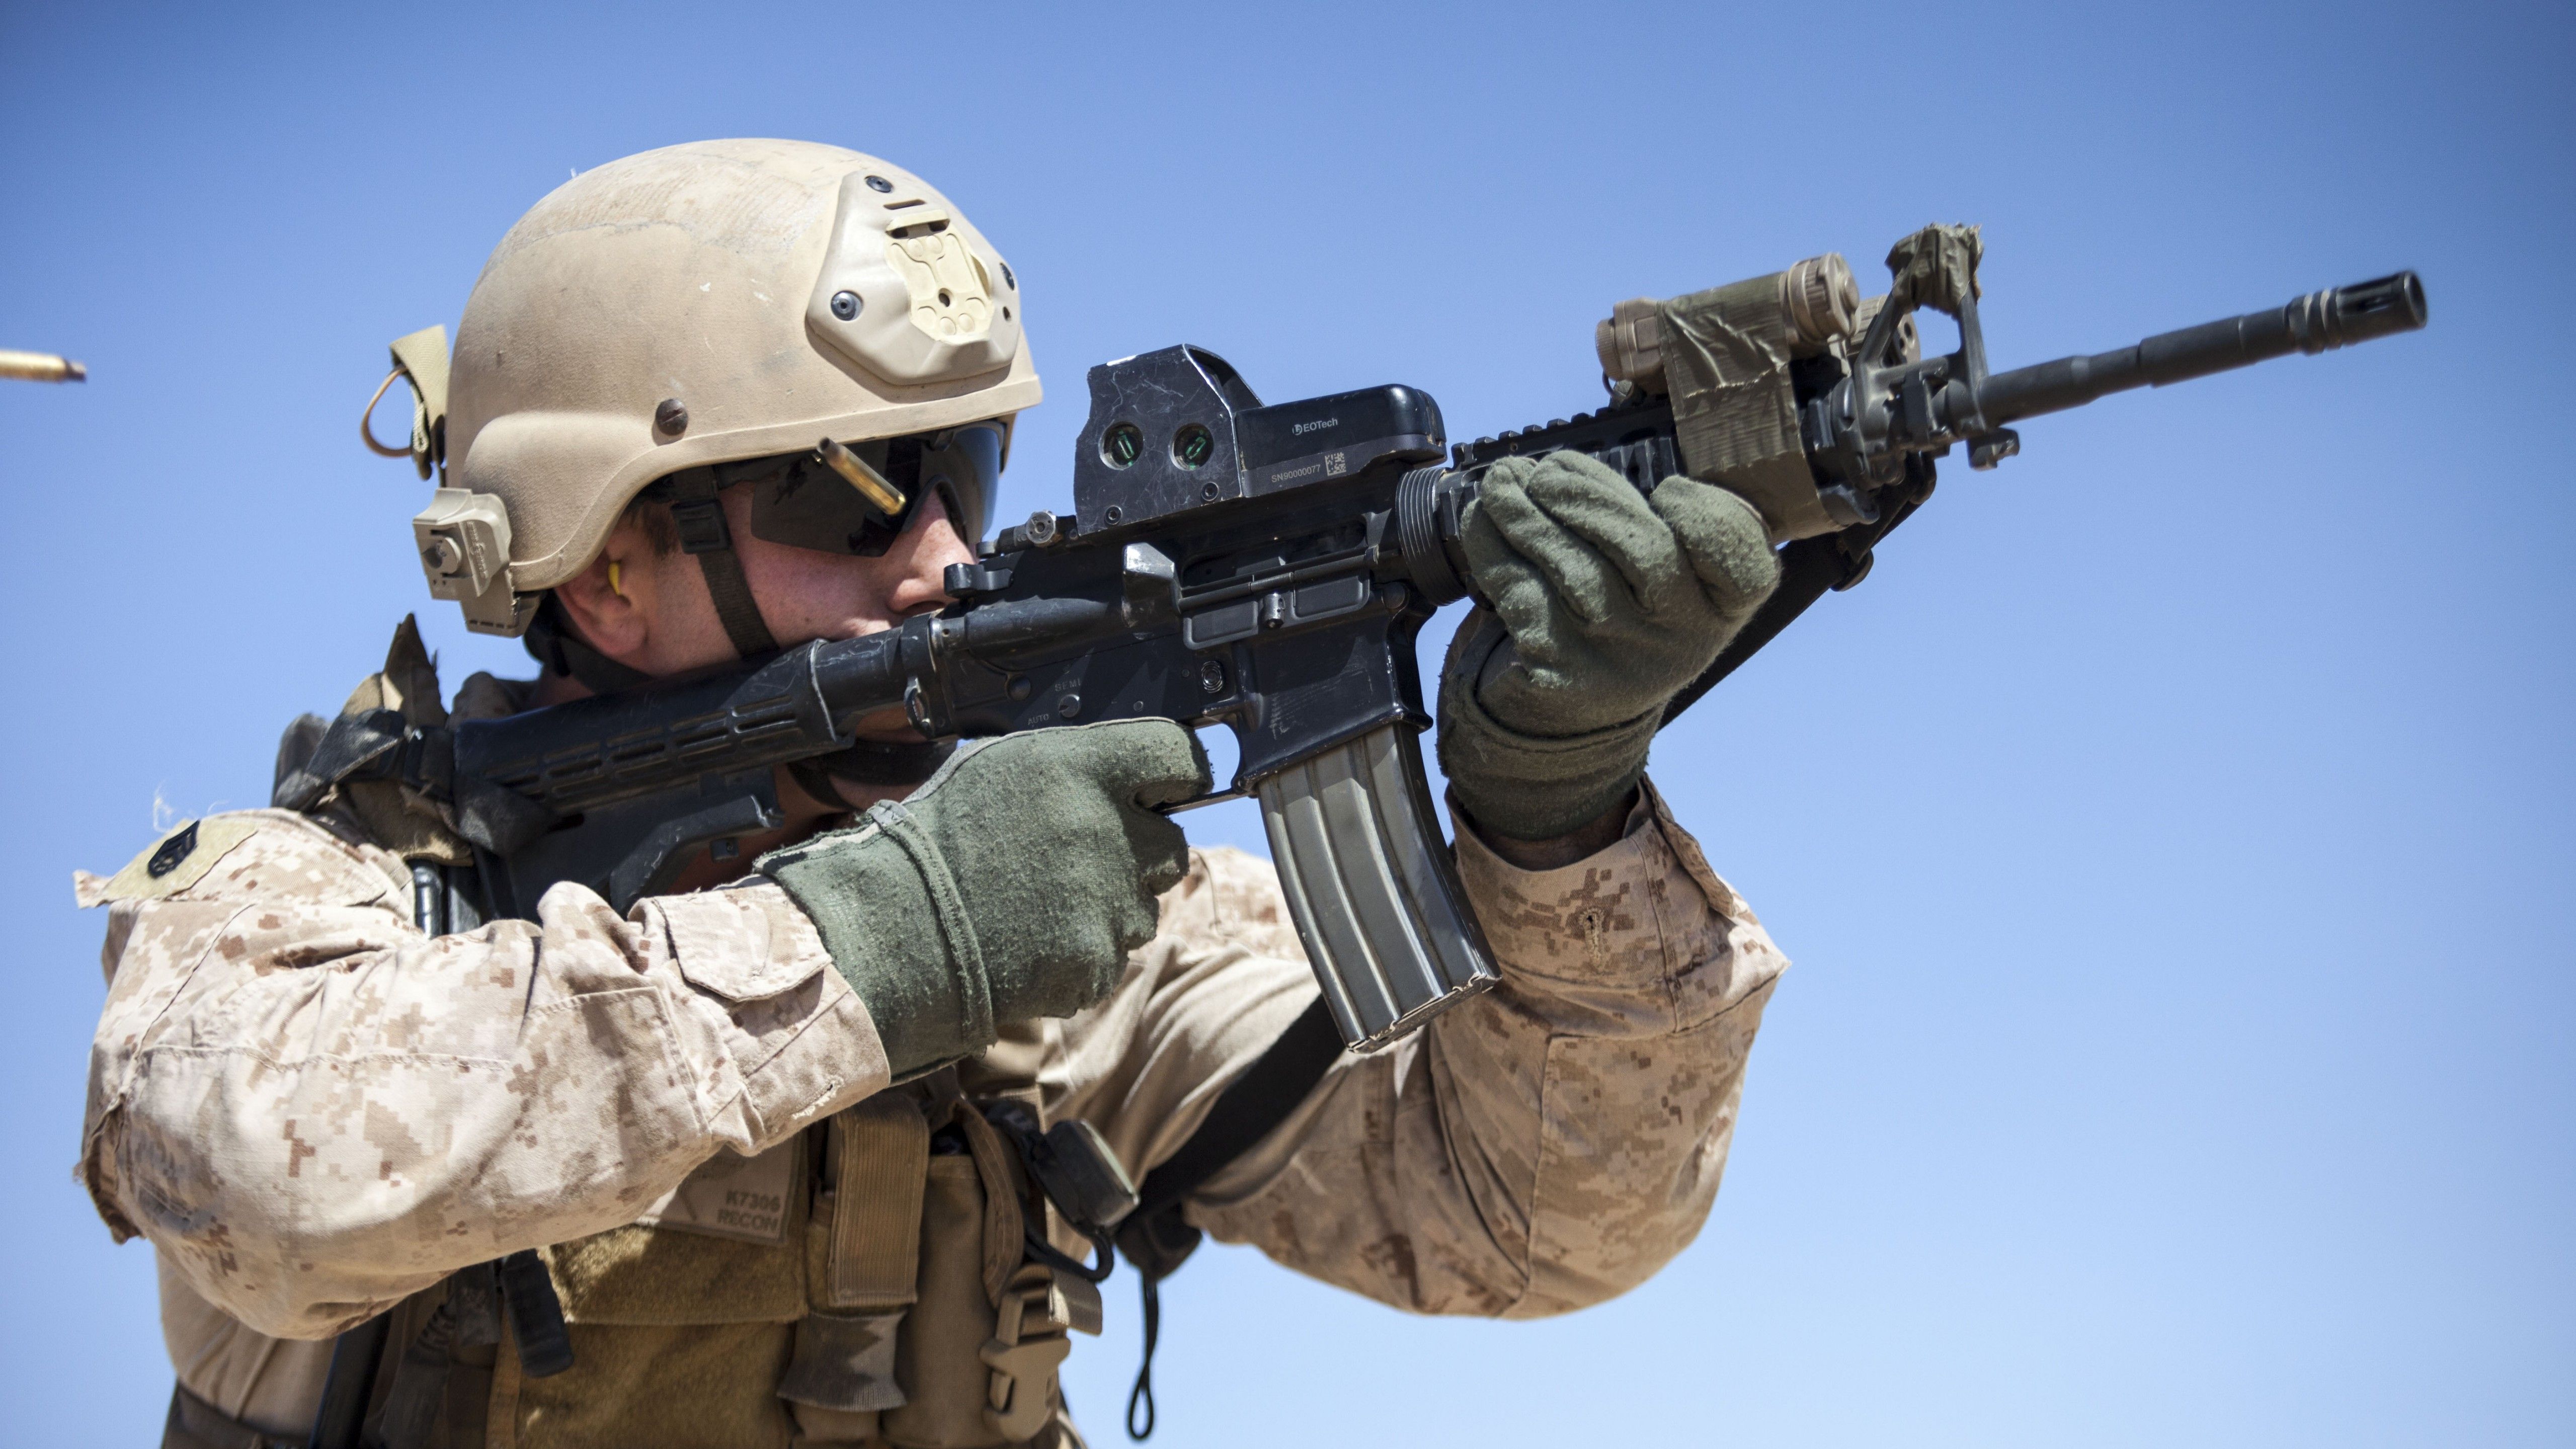 Wallpaper AR- M- red sight, U.S. Army, Marine Corps, Military